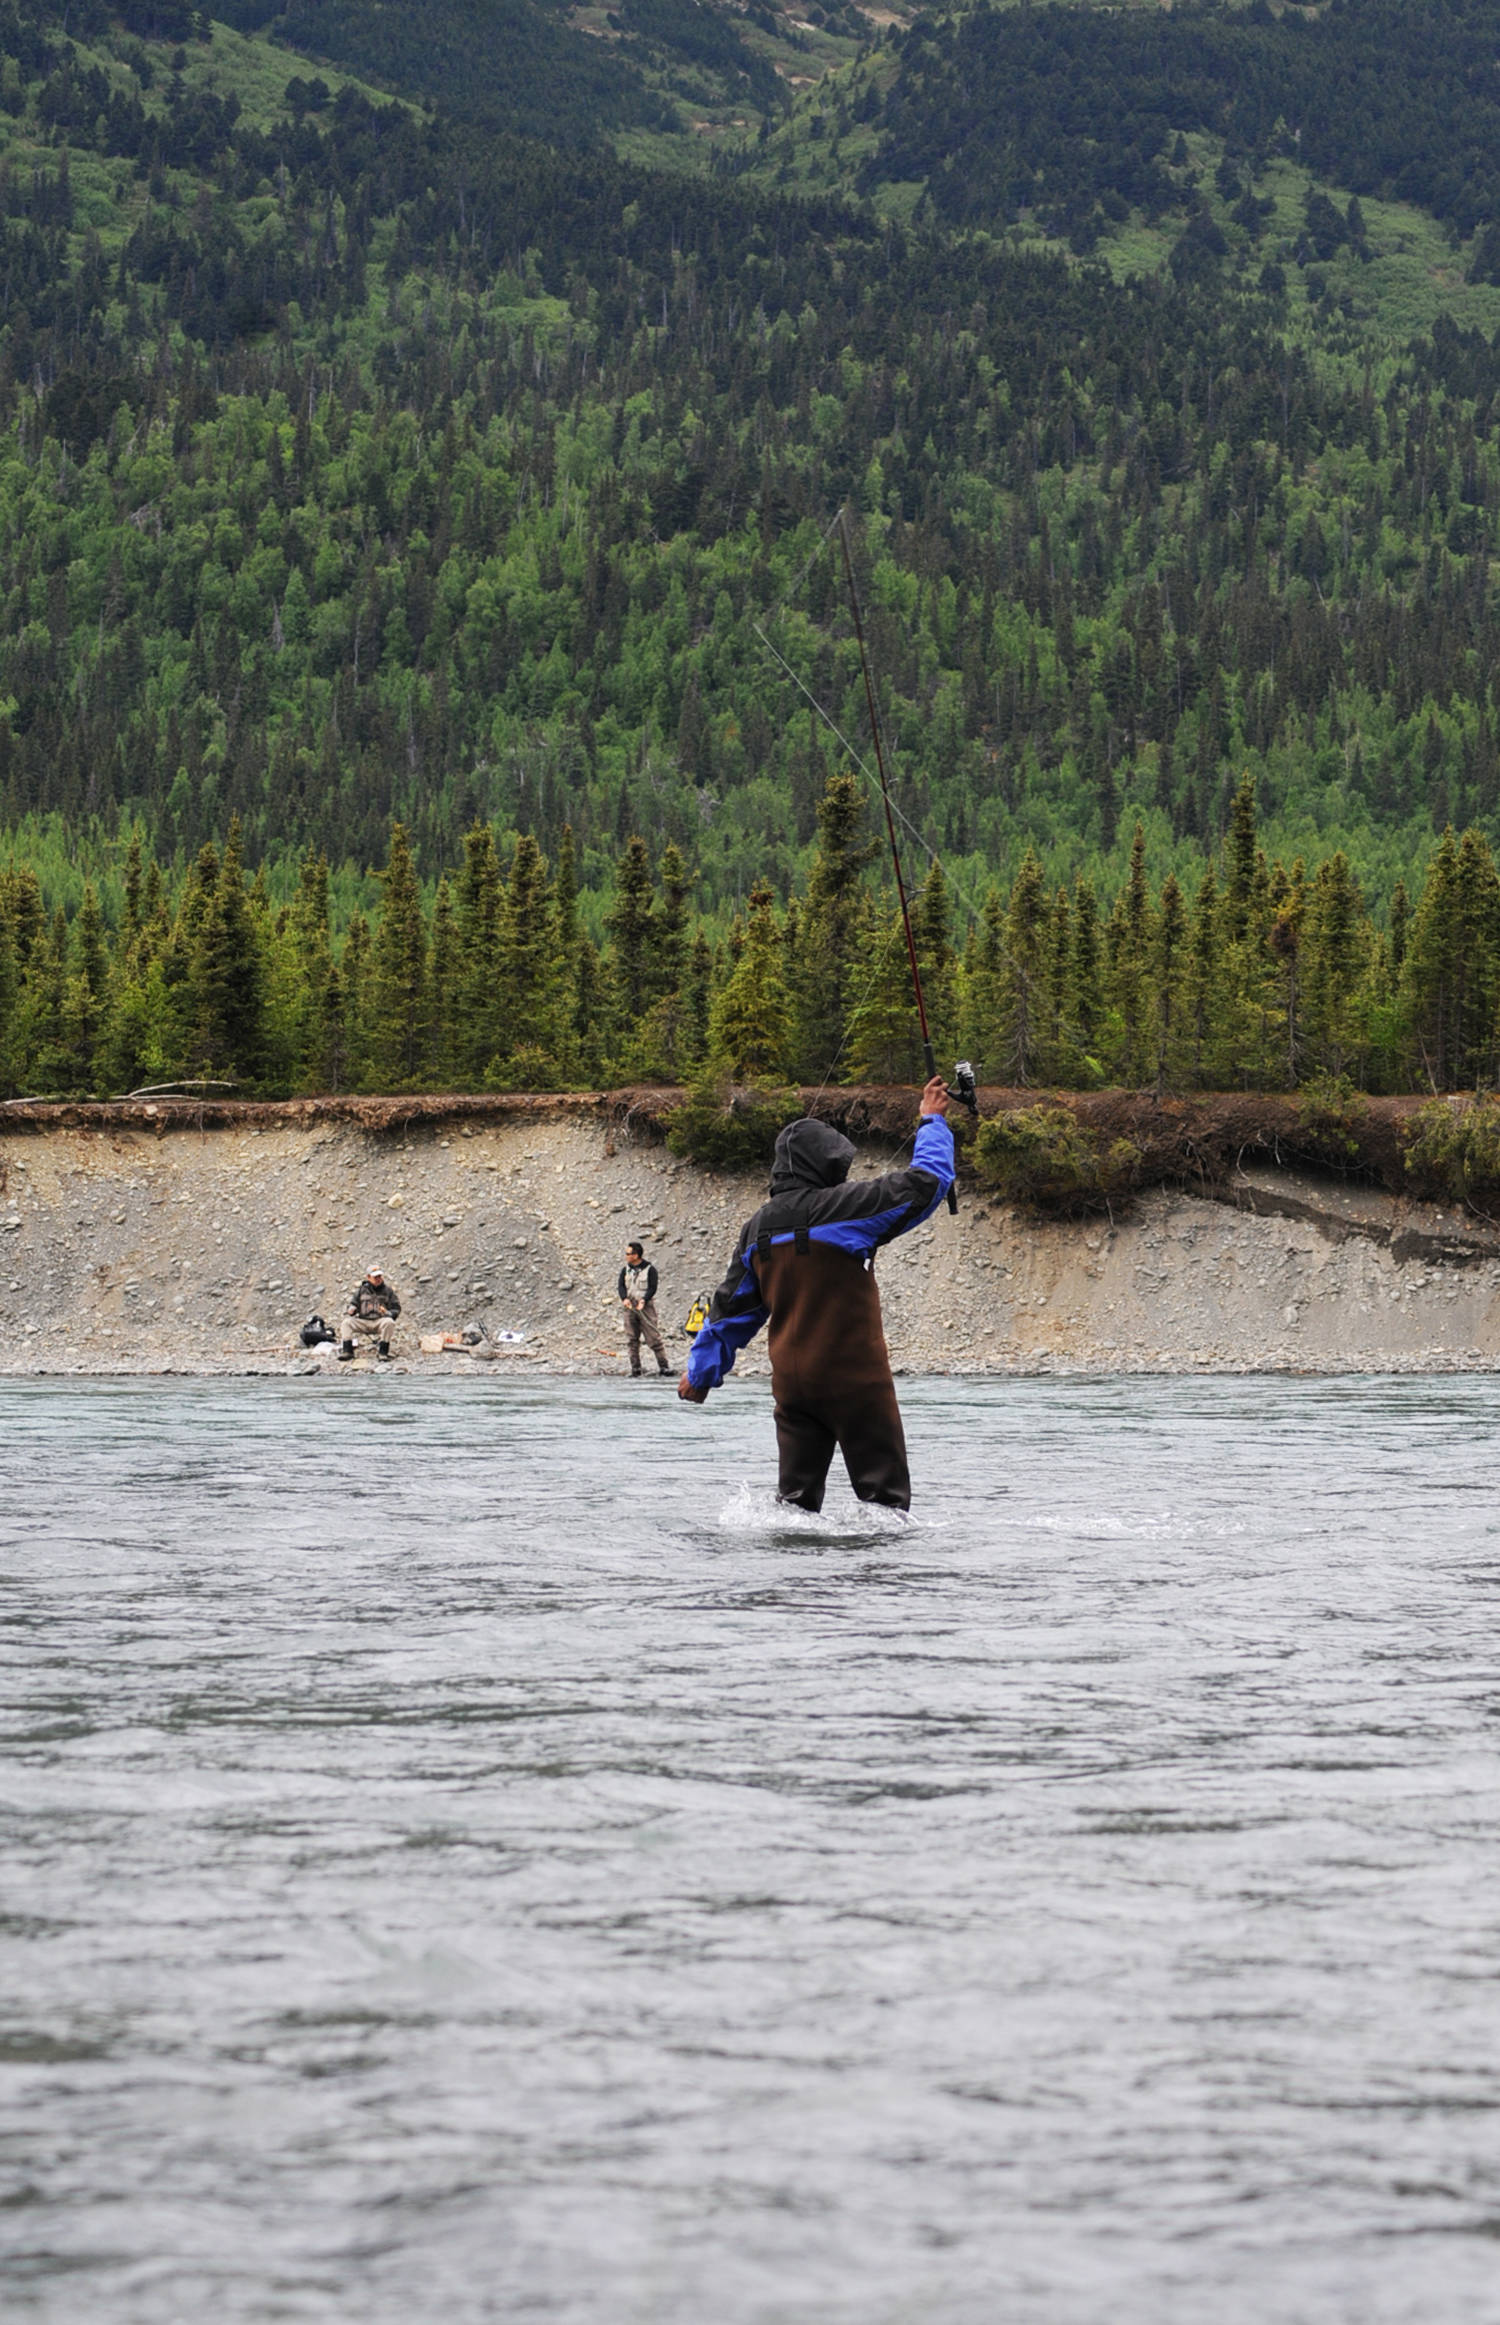 A flyfisherman casts for ockeye salmon on the bank of the Kenai River downstream of the confluence with the Russian River on Sunday, June 11, 2017 near Cooper Landing, Alaska. Sunday was the first opening for the popular Russian River sockeye salmon sportfishery, and by midmorning, many anglers were already packing out their limits of salmon while others pulled in their catches. As of Saturday, the Alaska Department of Fish and Game’s weir on Lower Russian Lake had counted 1,027 sockeye, more than triple the 274 that had passed the weir as of the same date in 2016. (Elizabeth Earl/Peninsula Clarion)